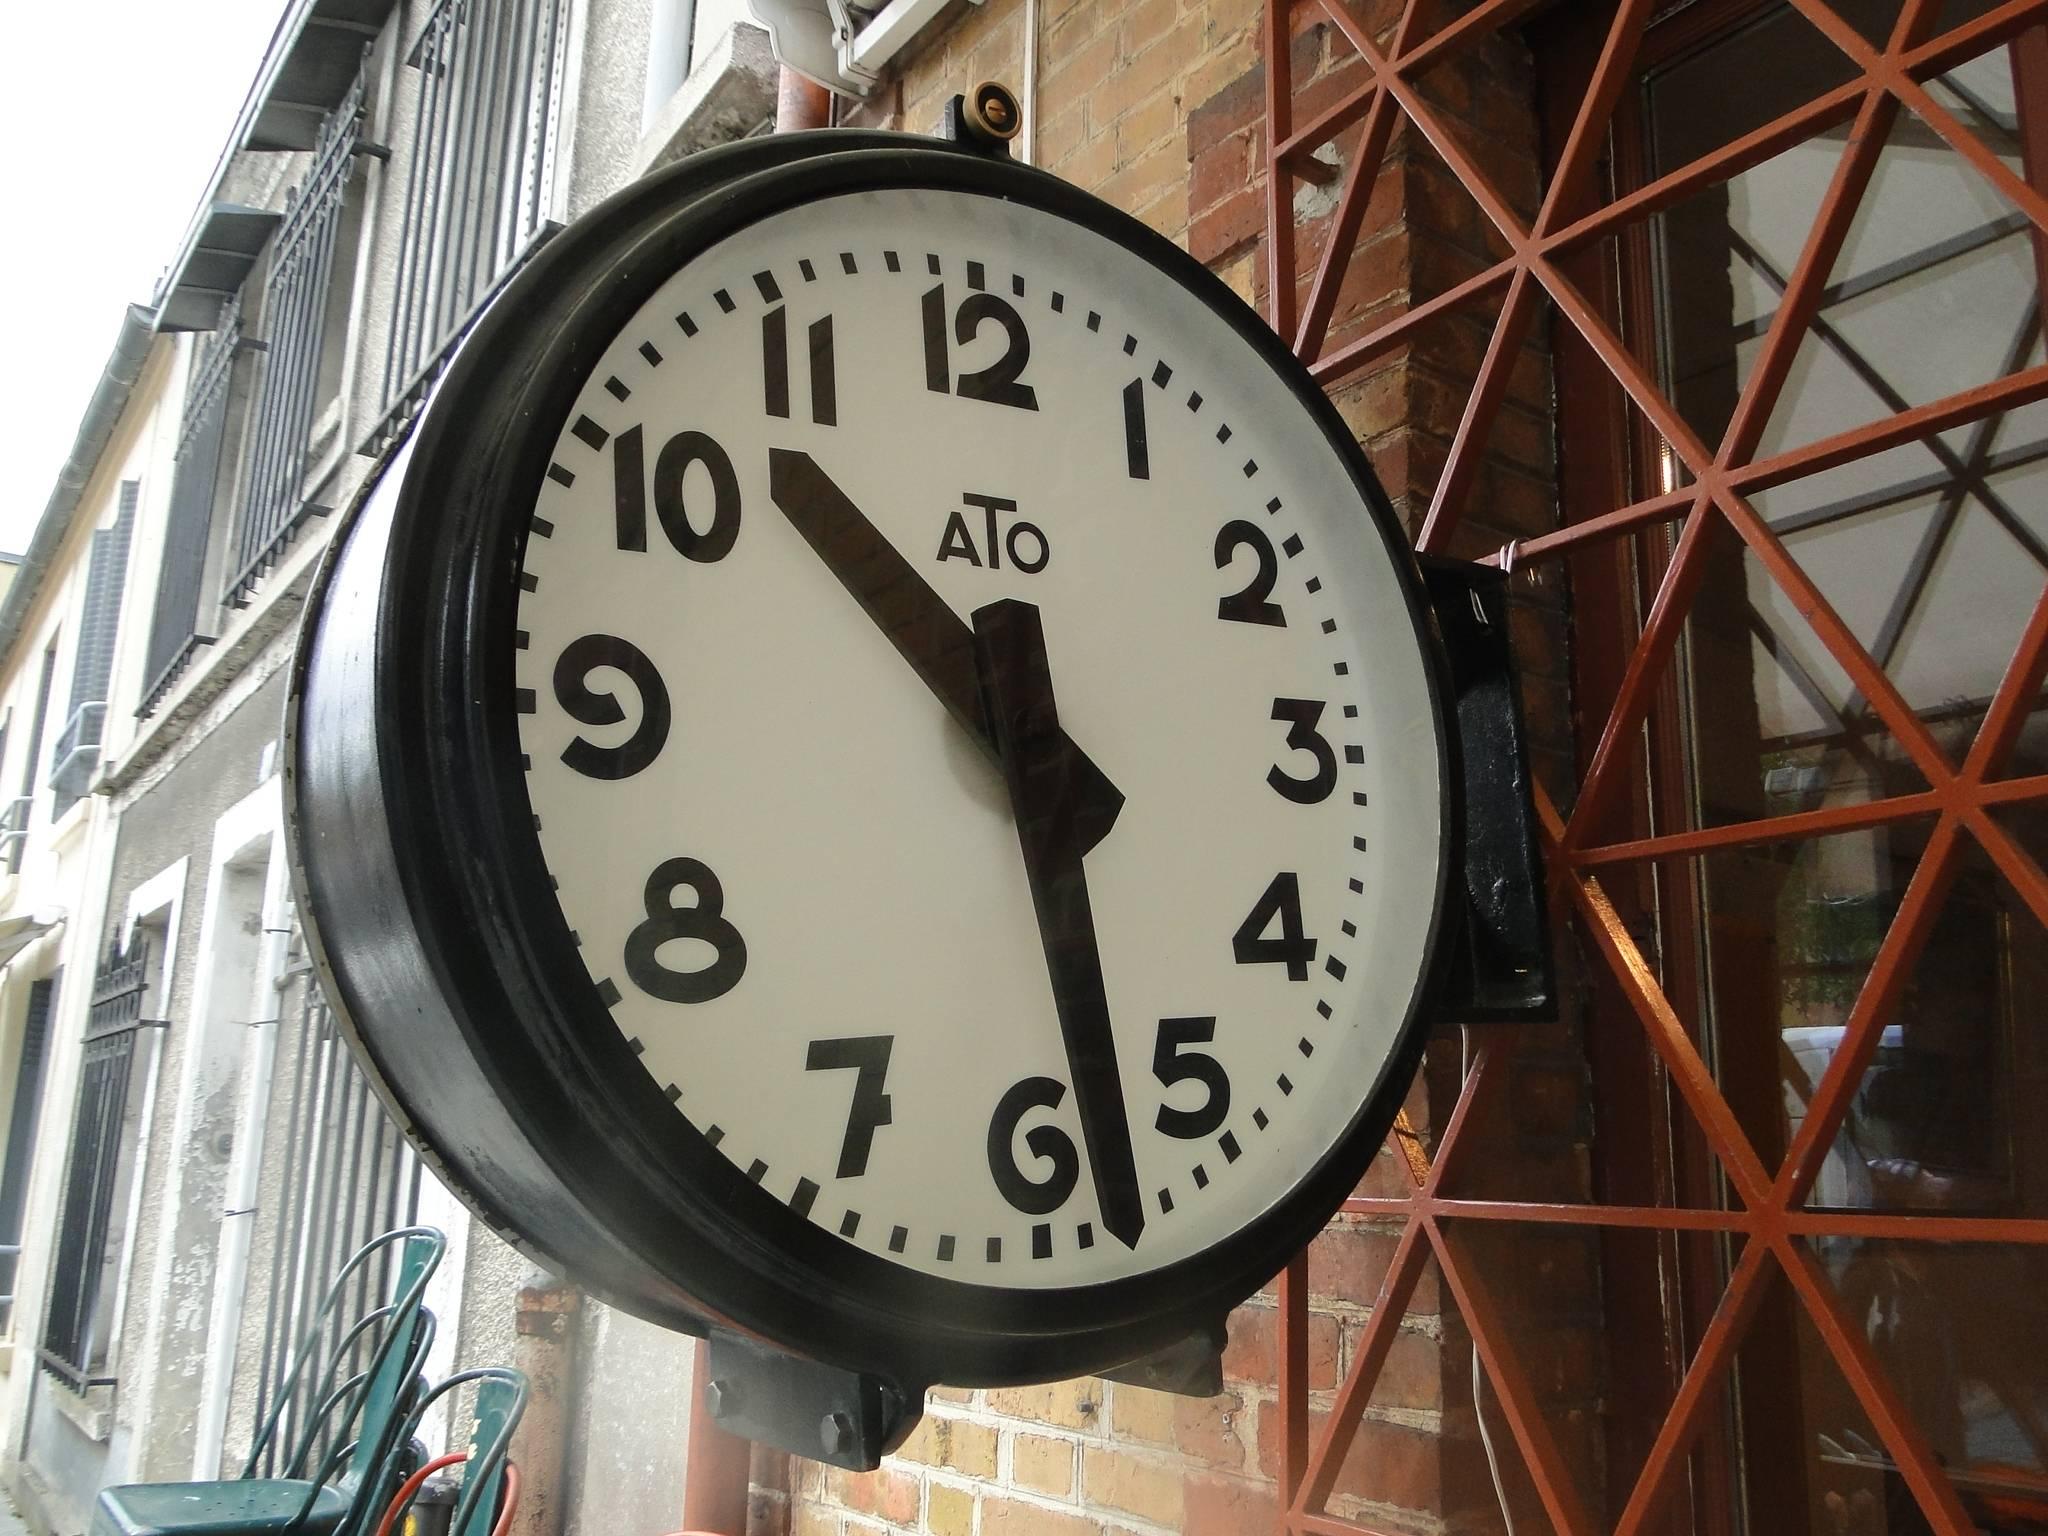 Vintage French station - railway - factory ato clock.

Double-sided with glass and lighting

The frame is aluminium with glass. 

It measures 29